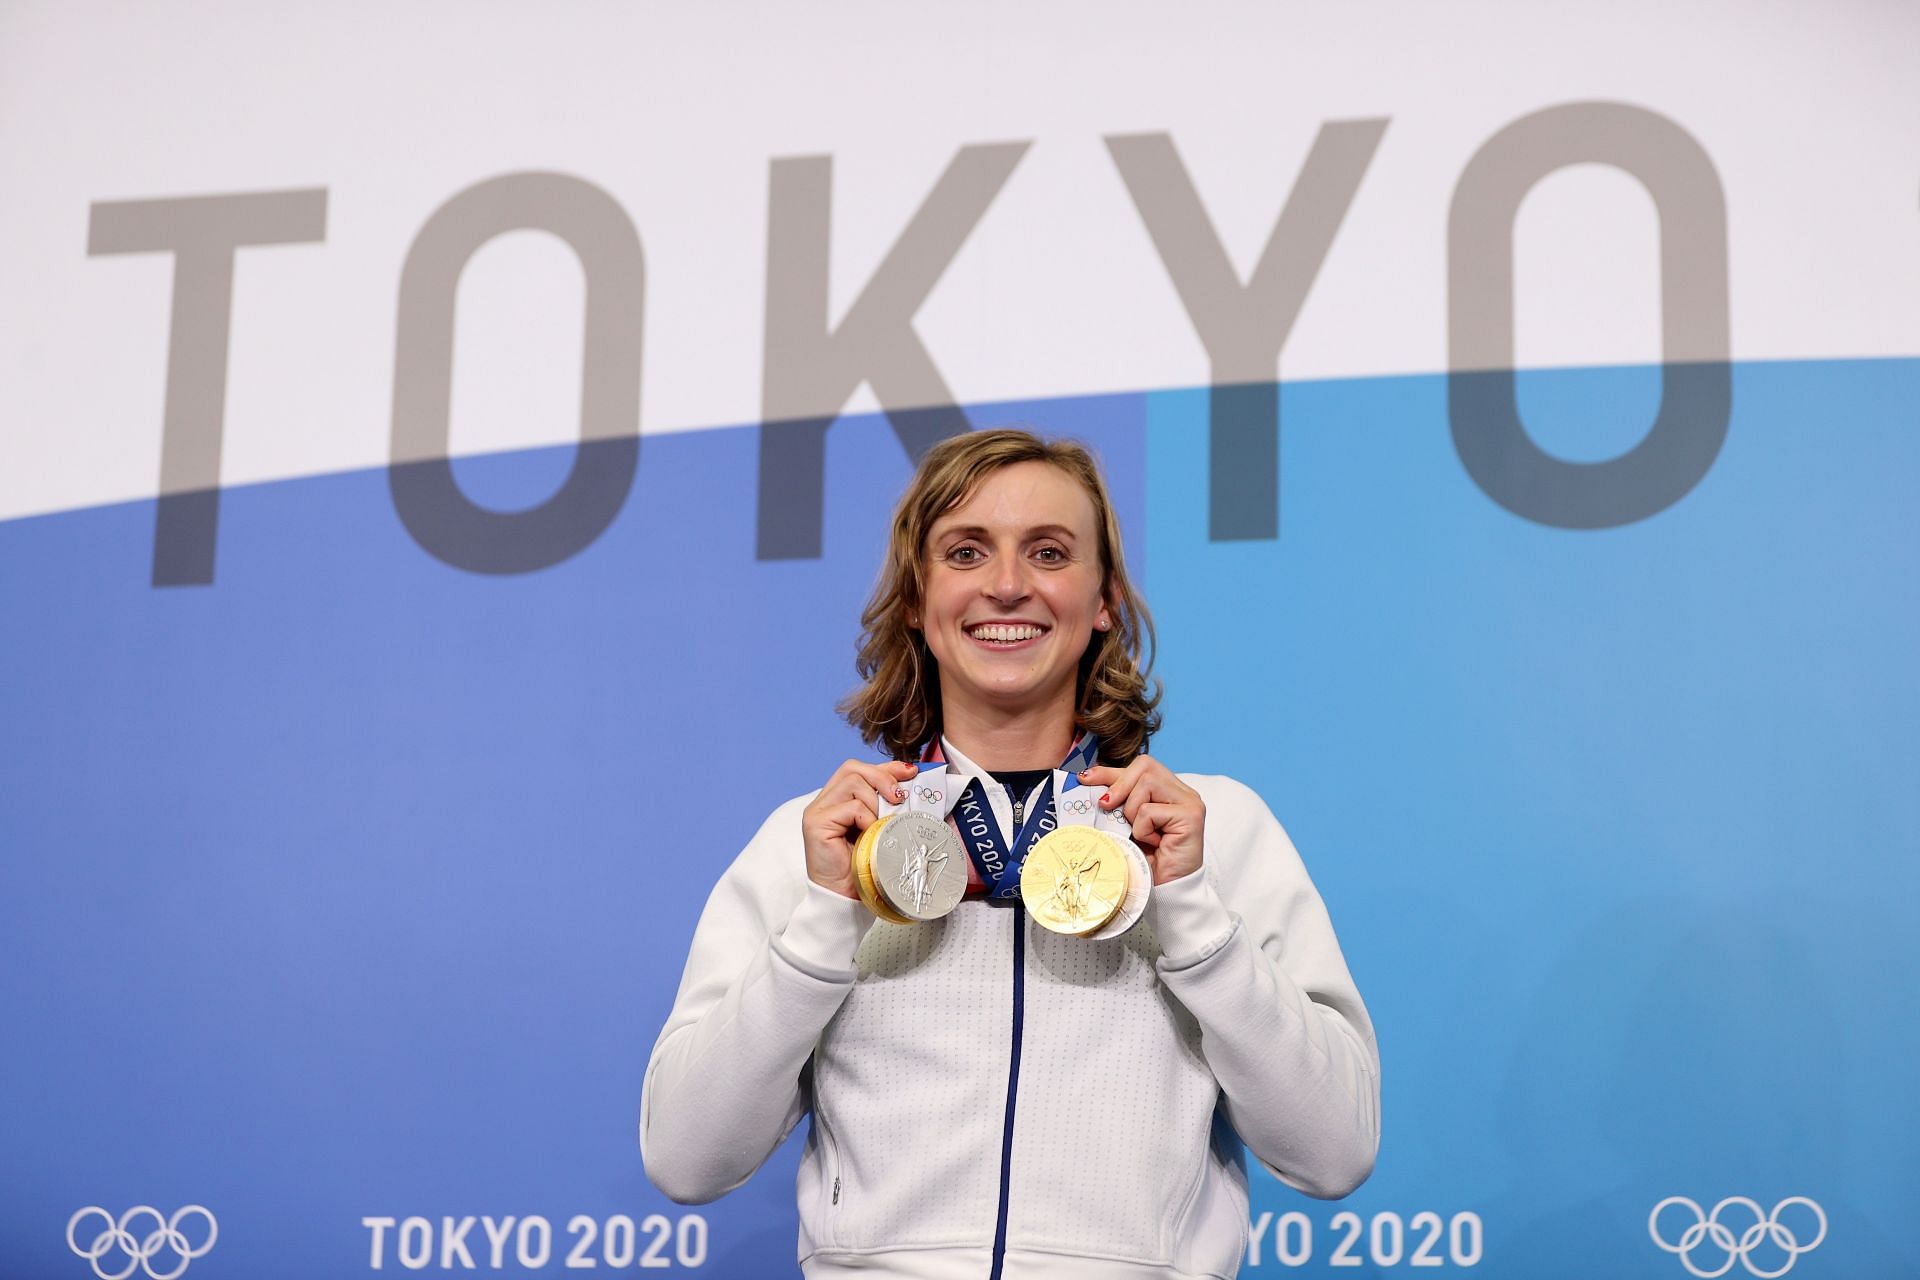 Katie Ledecky after giving a press conference to the media during the Tokyo Olympics 2020. (Photo by Laurence Griffiths/Getty Images)